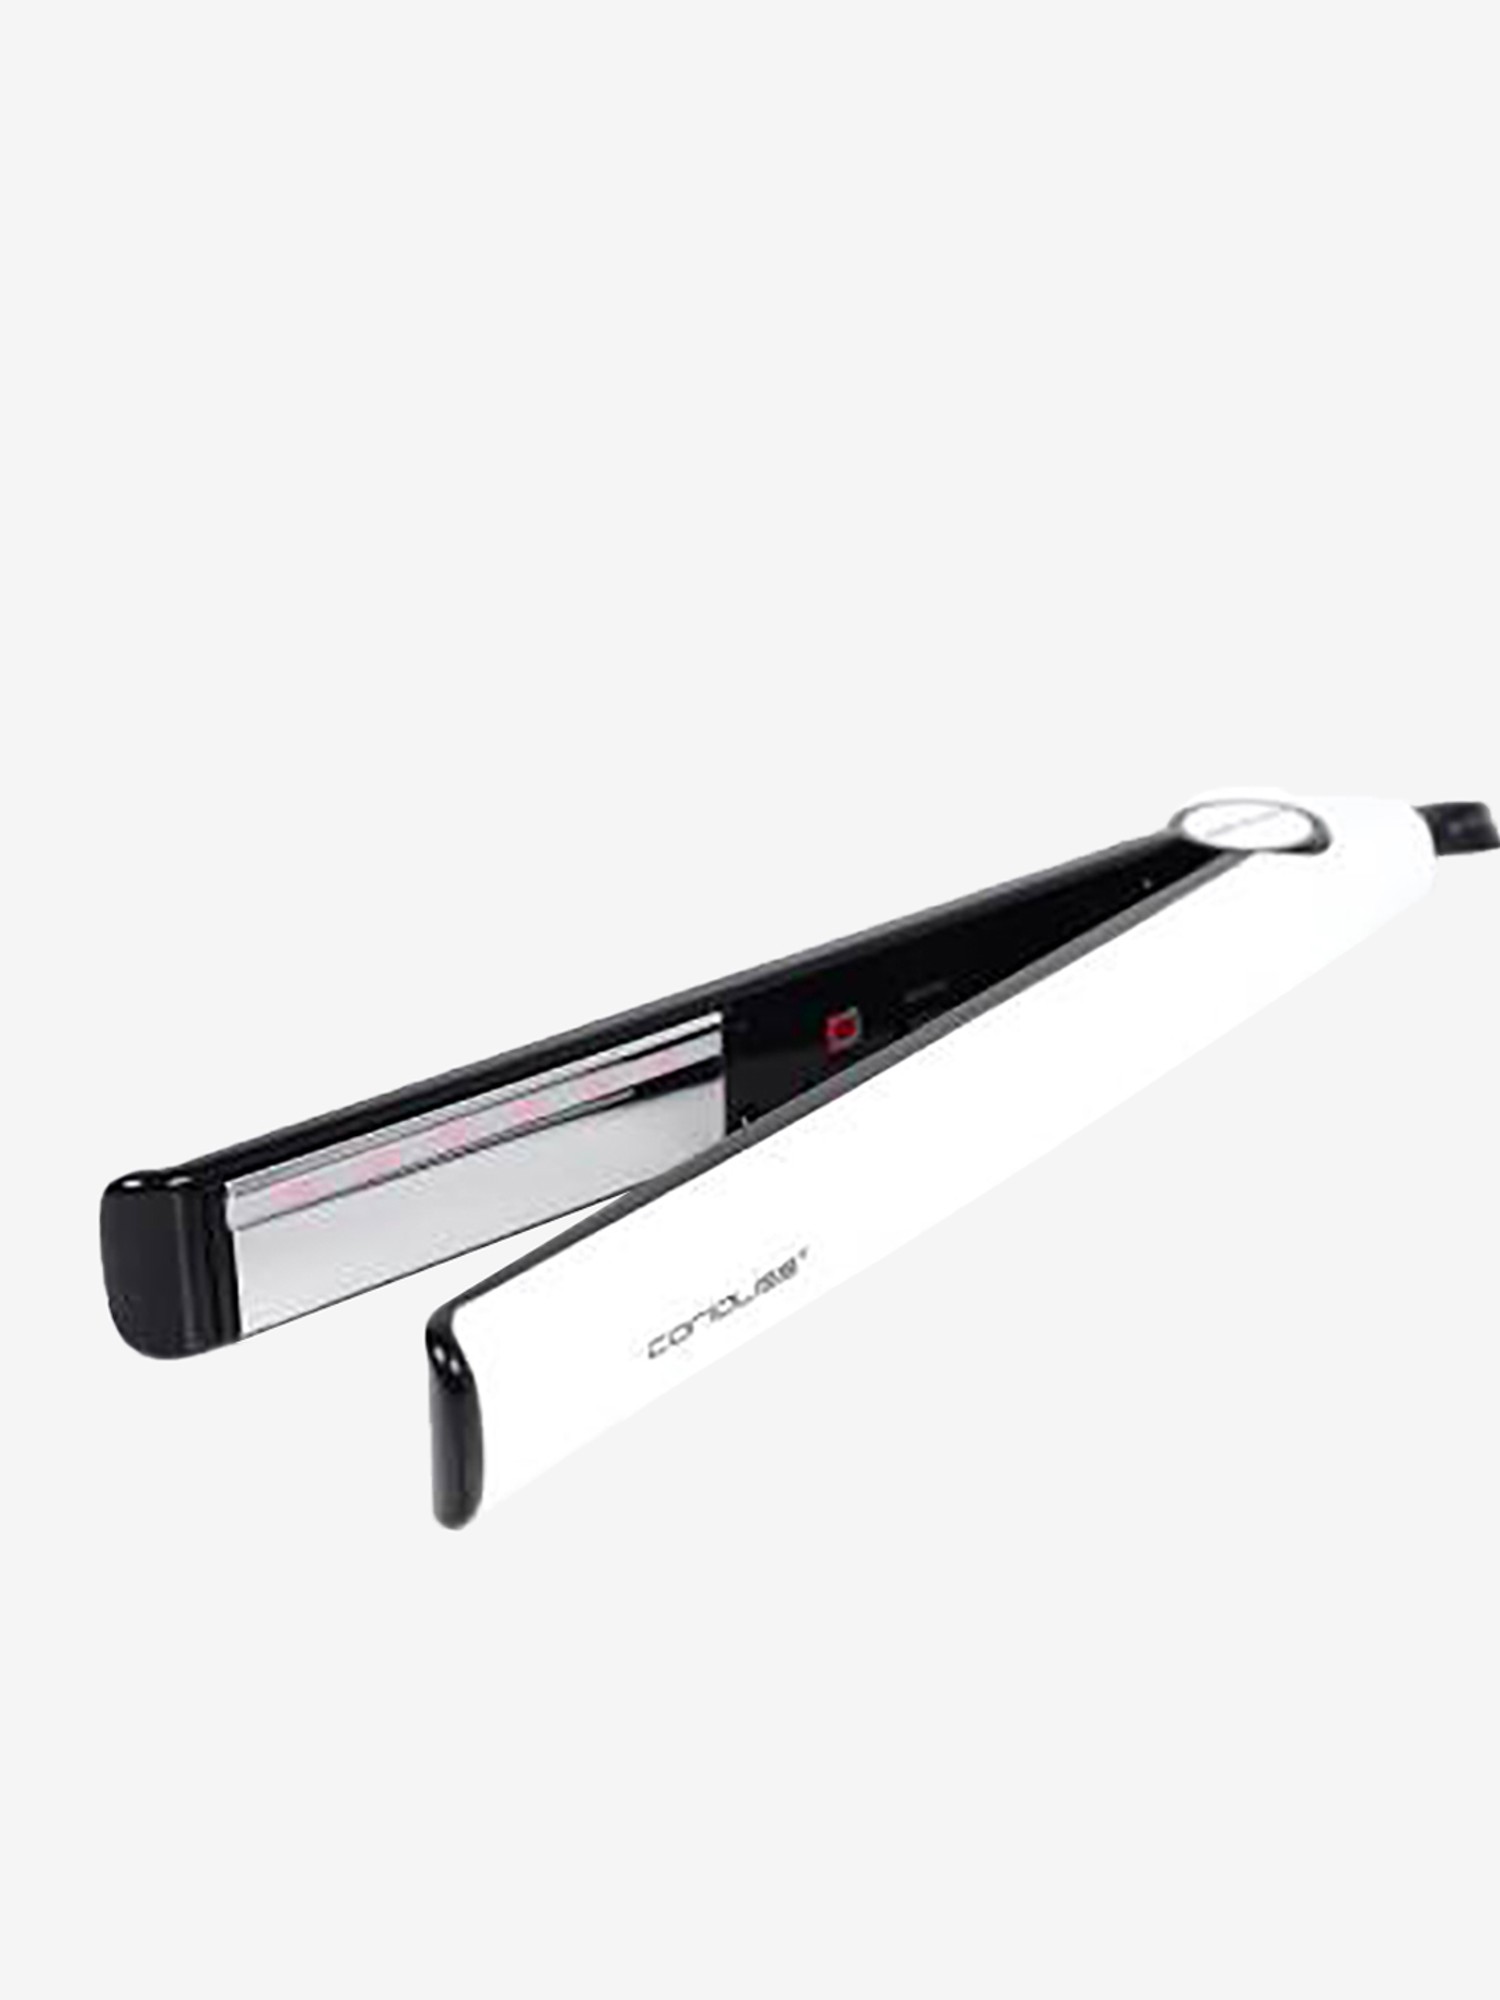 Corioliss - Hair Straighteners, Curling Irons & Hair Clippers